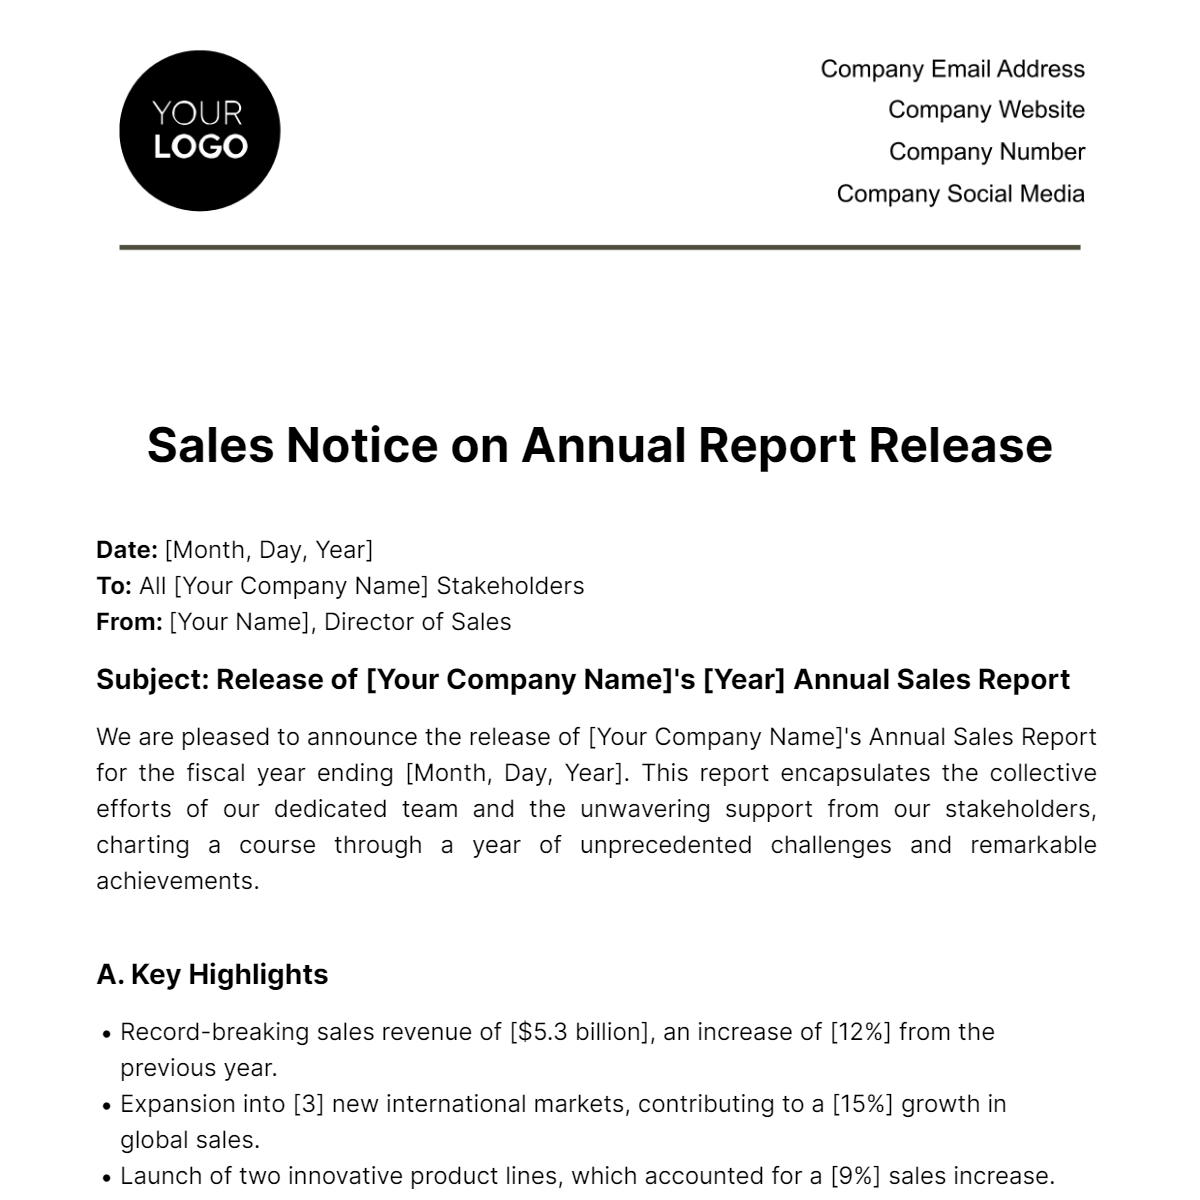 Free Sales Notice on Annual Report Release Template